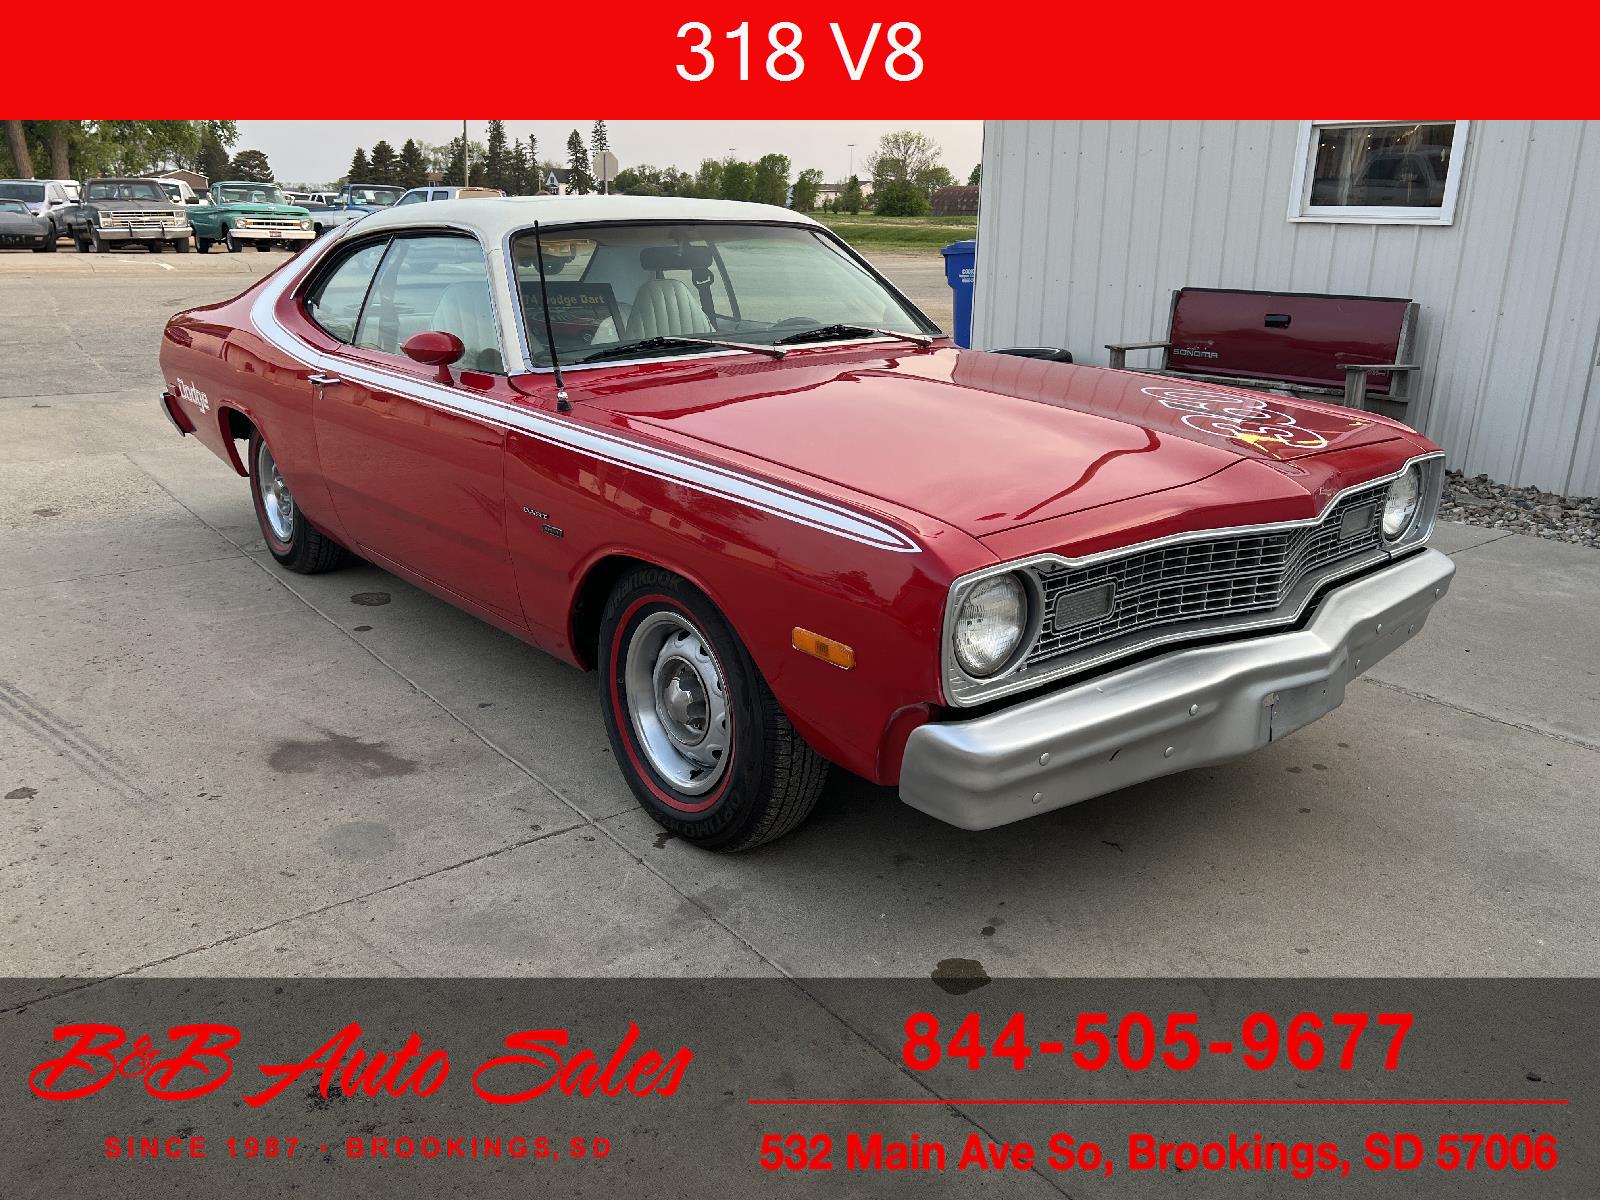 New and Used 1970 to 1979 Dodge Dart For Sale